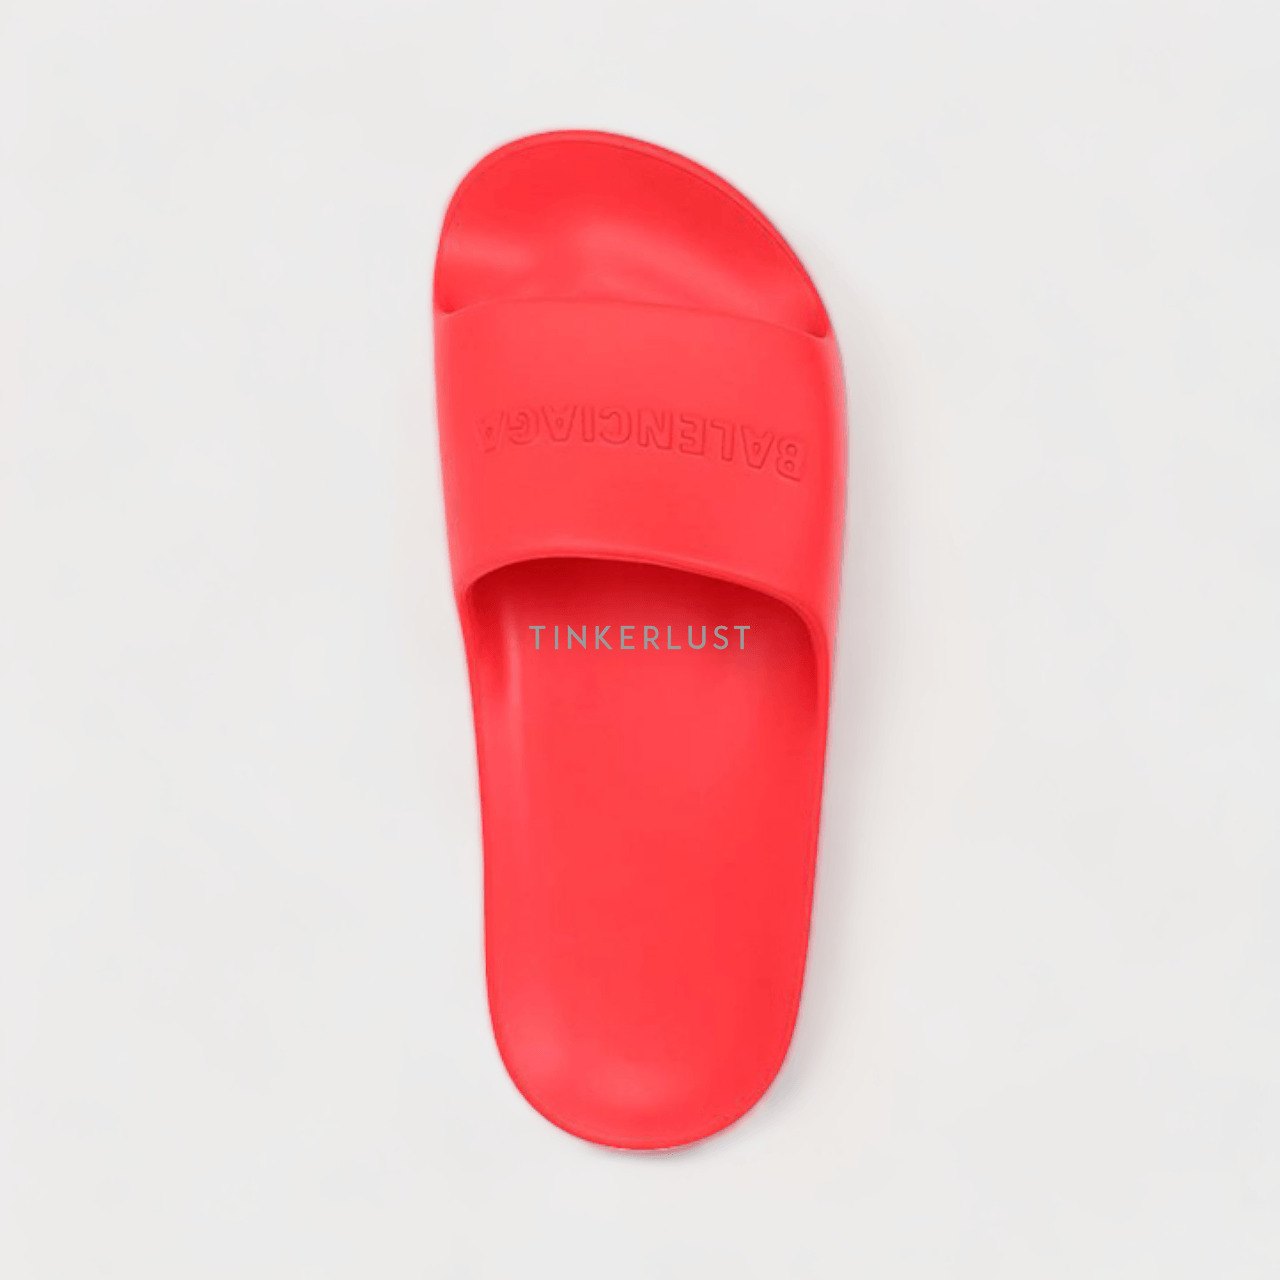 Balenciaga Women Chunky Slide Sandals in Tomato Red with Embossed Logo